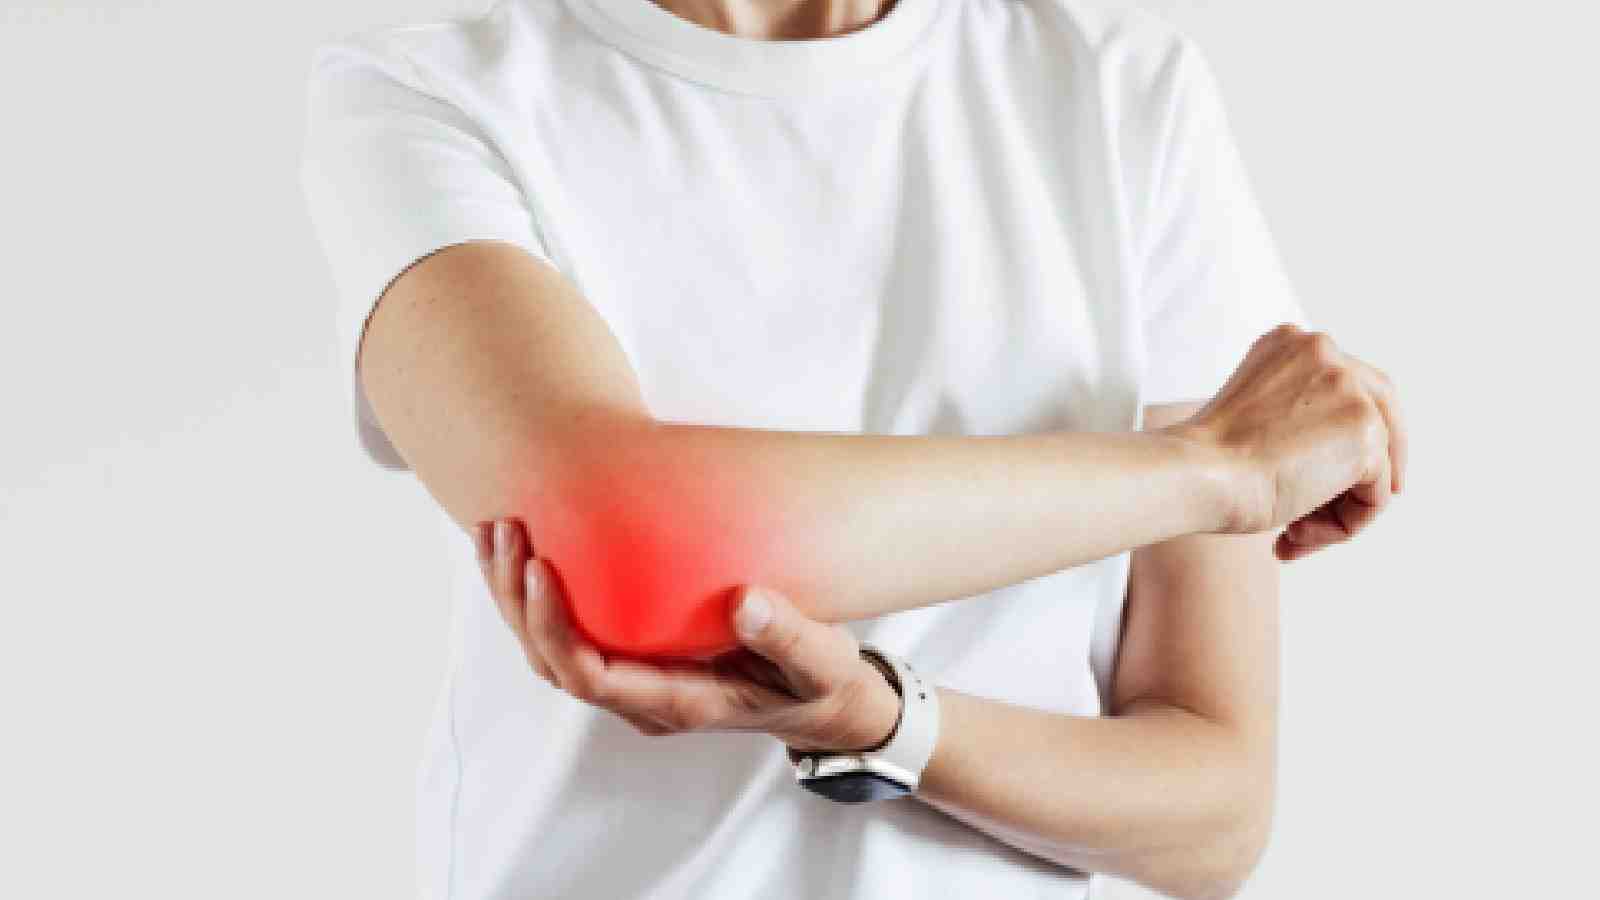 Neck to knee: 7 kitchen ingredients for pain relief